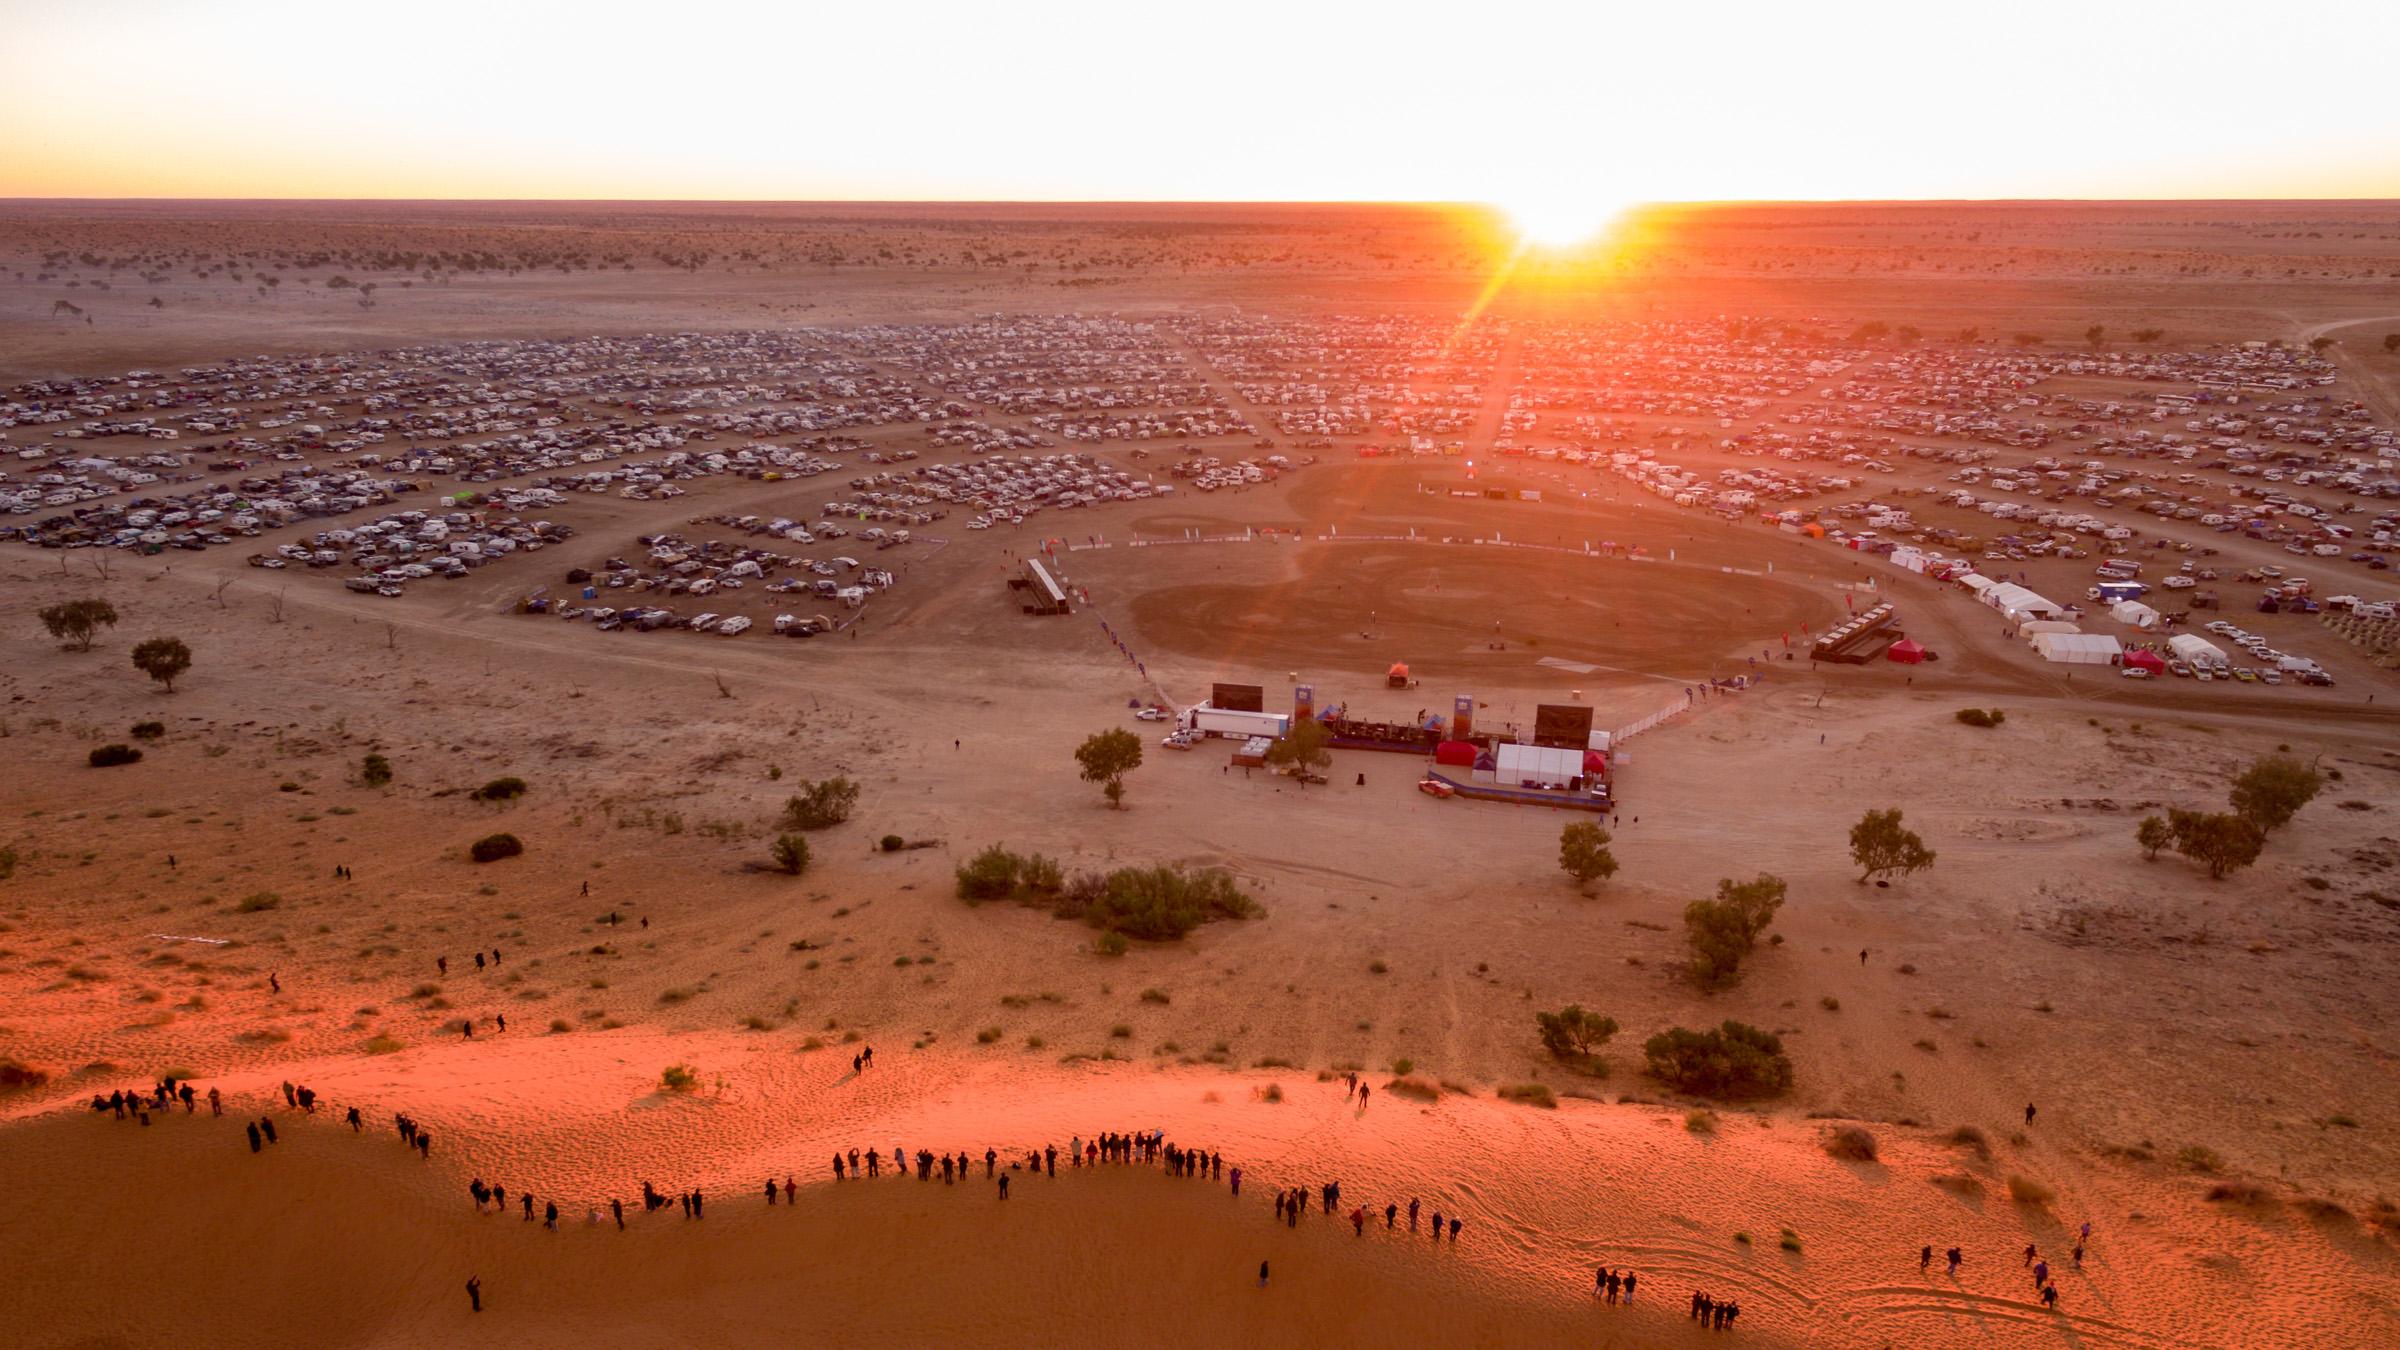 Aerial view of a festival stage in the desert with cars, camper vans and sand dunes